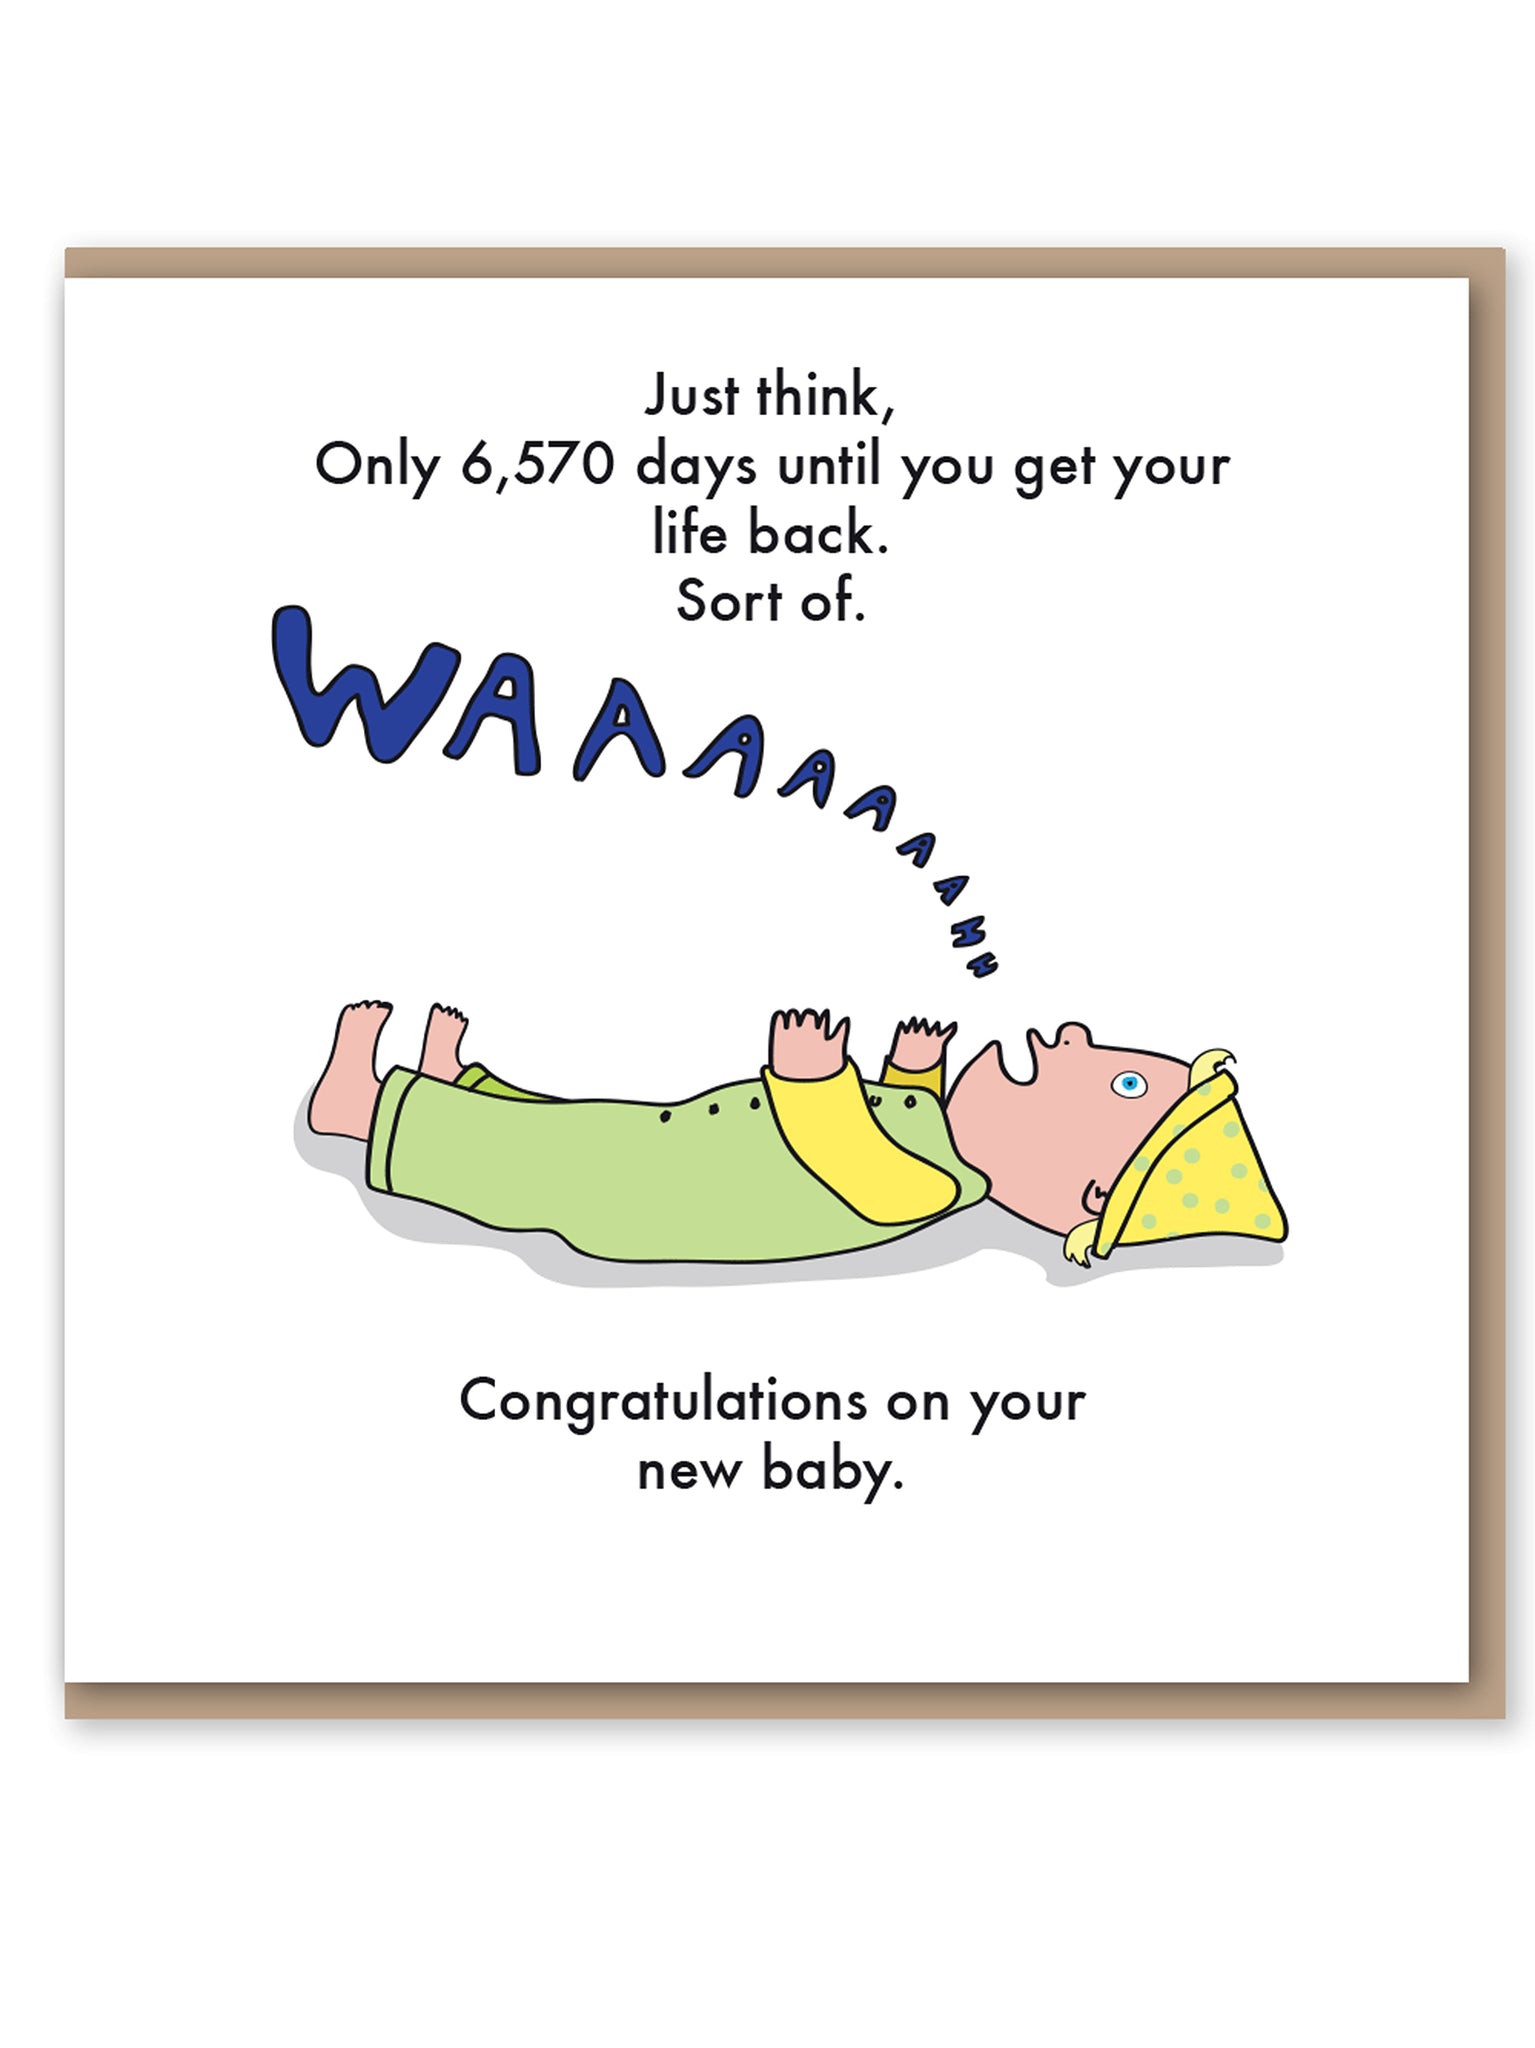 Baby - Life Back card